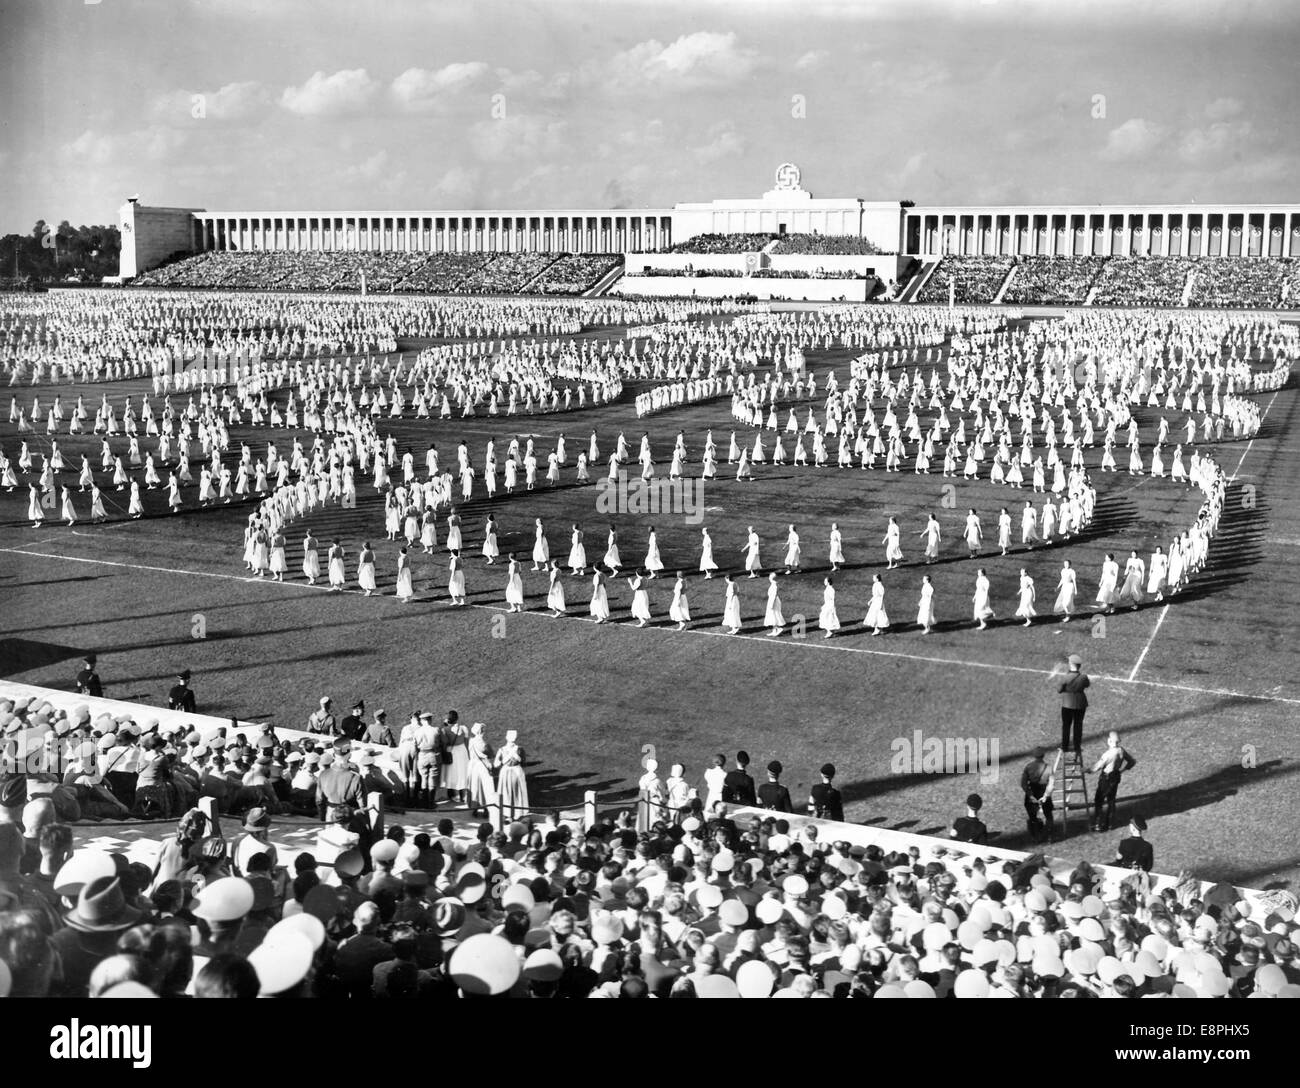 Nuremberg Rally in Nuremberg, Germany - Dance display on the 'Day of the Community' on Zeppelin Field at the Nazi party rally grounds, here 5,000 members of the League of German Girls (BDM) present folk dances, In the background the grandstand. (Flaws in quality due to the historic picture copy) Fotoarchiv für Zeitgeschichtee - NO WIRE SERVICE - Stock Photo